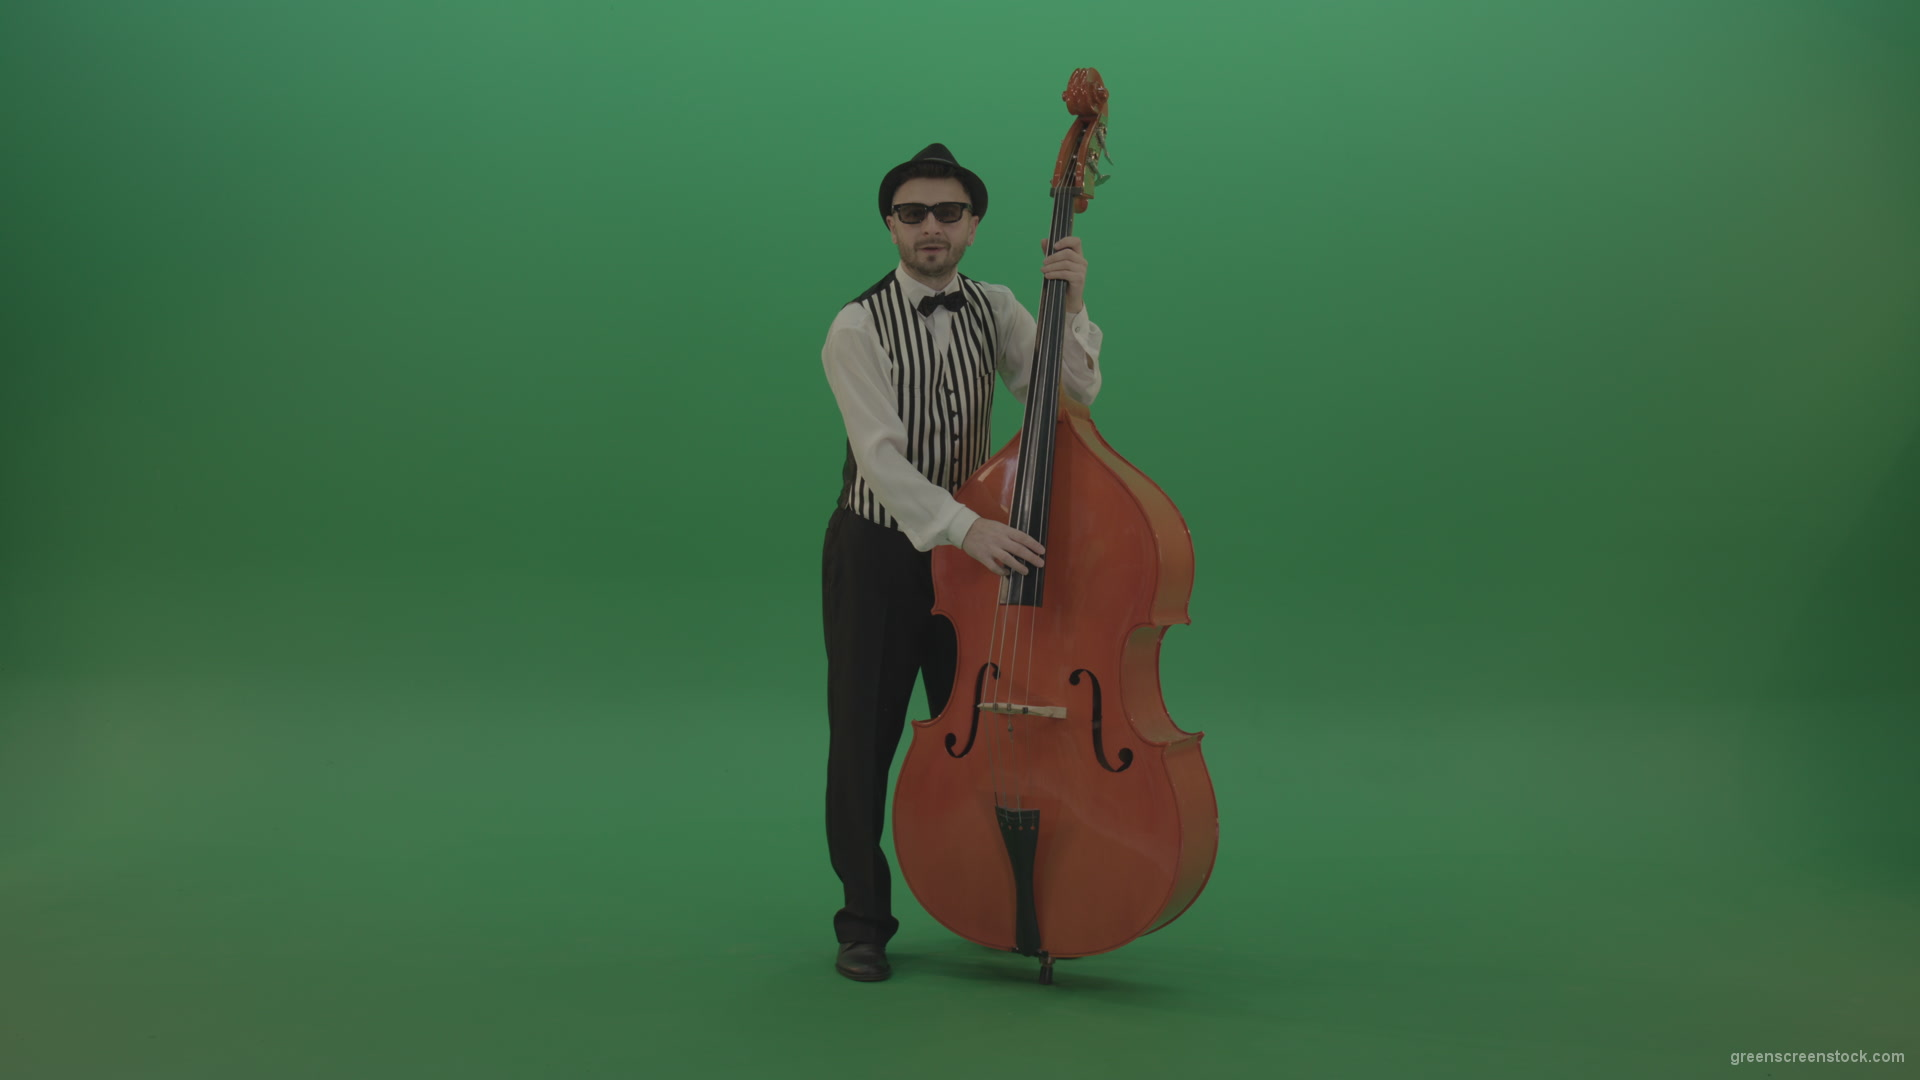 Full-size-man-play-jazz-on-double-bass-String-music-instrument-isolated-on-green-screen_001 Green Screen Stock